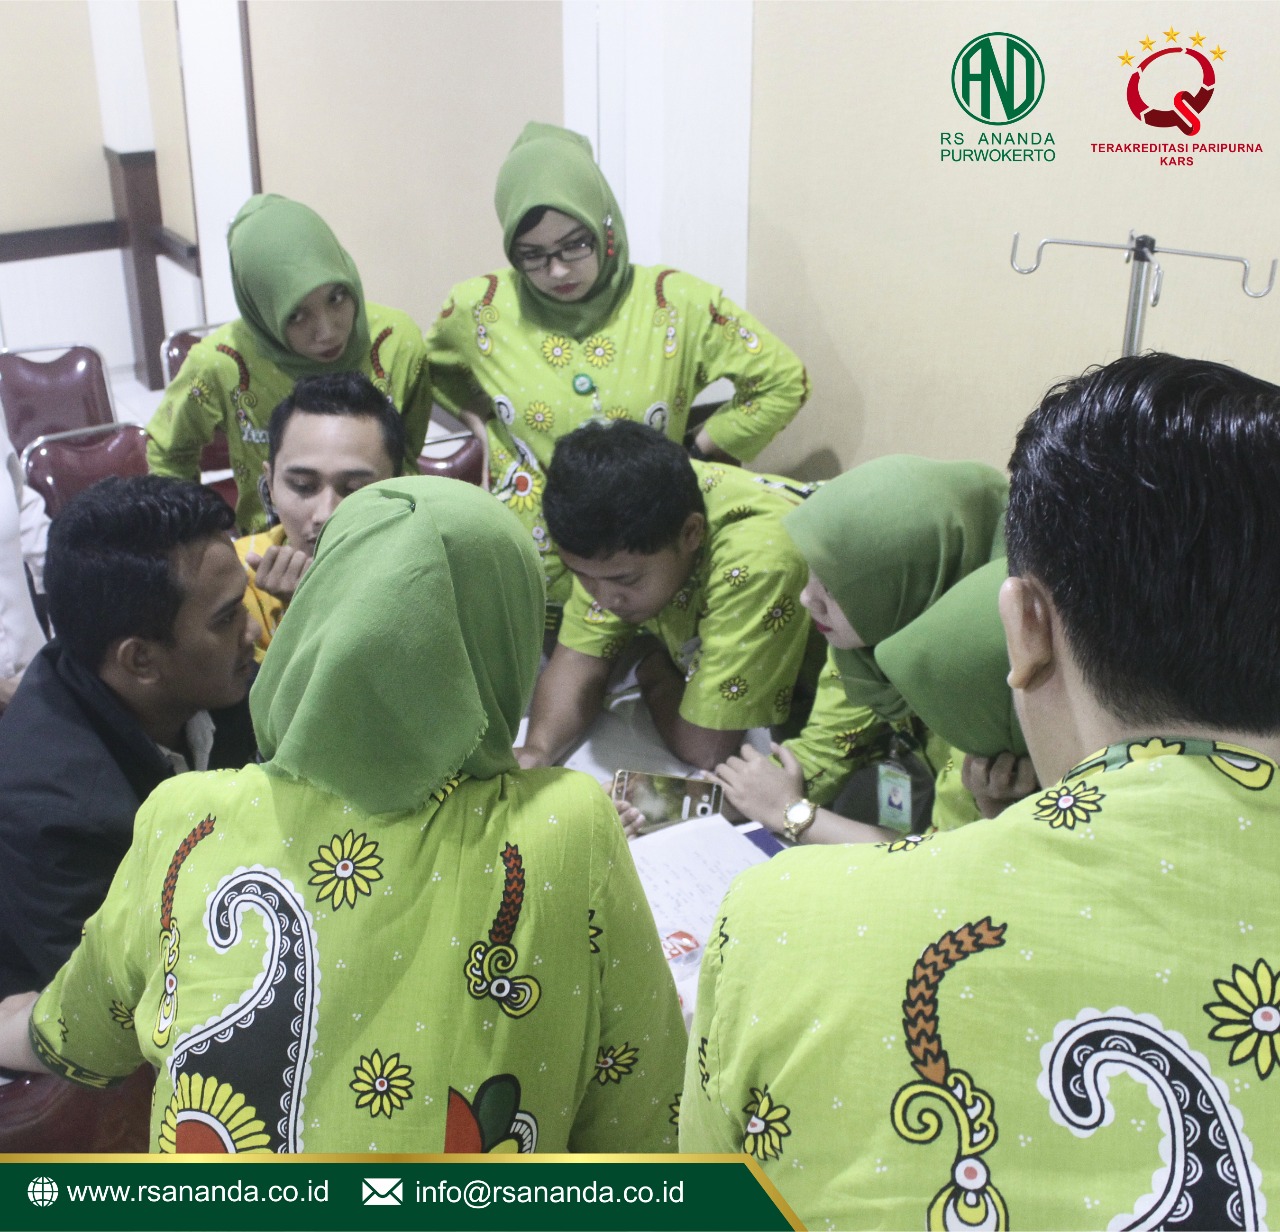 in house training - rs ananda purwokerto IN HOUSE TRAINING &#8211; RS ANANDA PURWOKERTO WhatsApp Image 2018 03 10 at 10